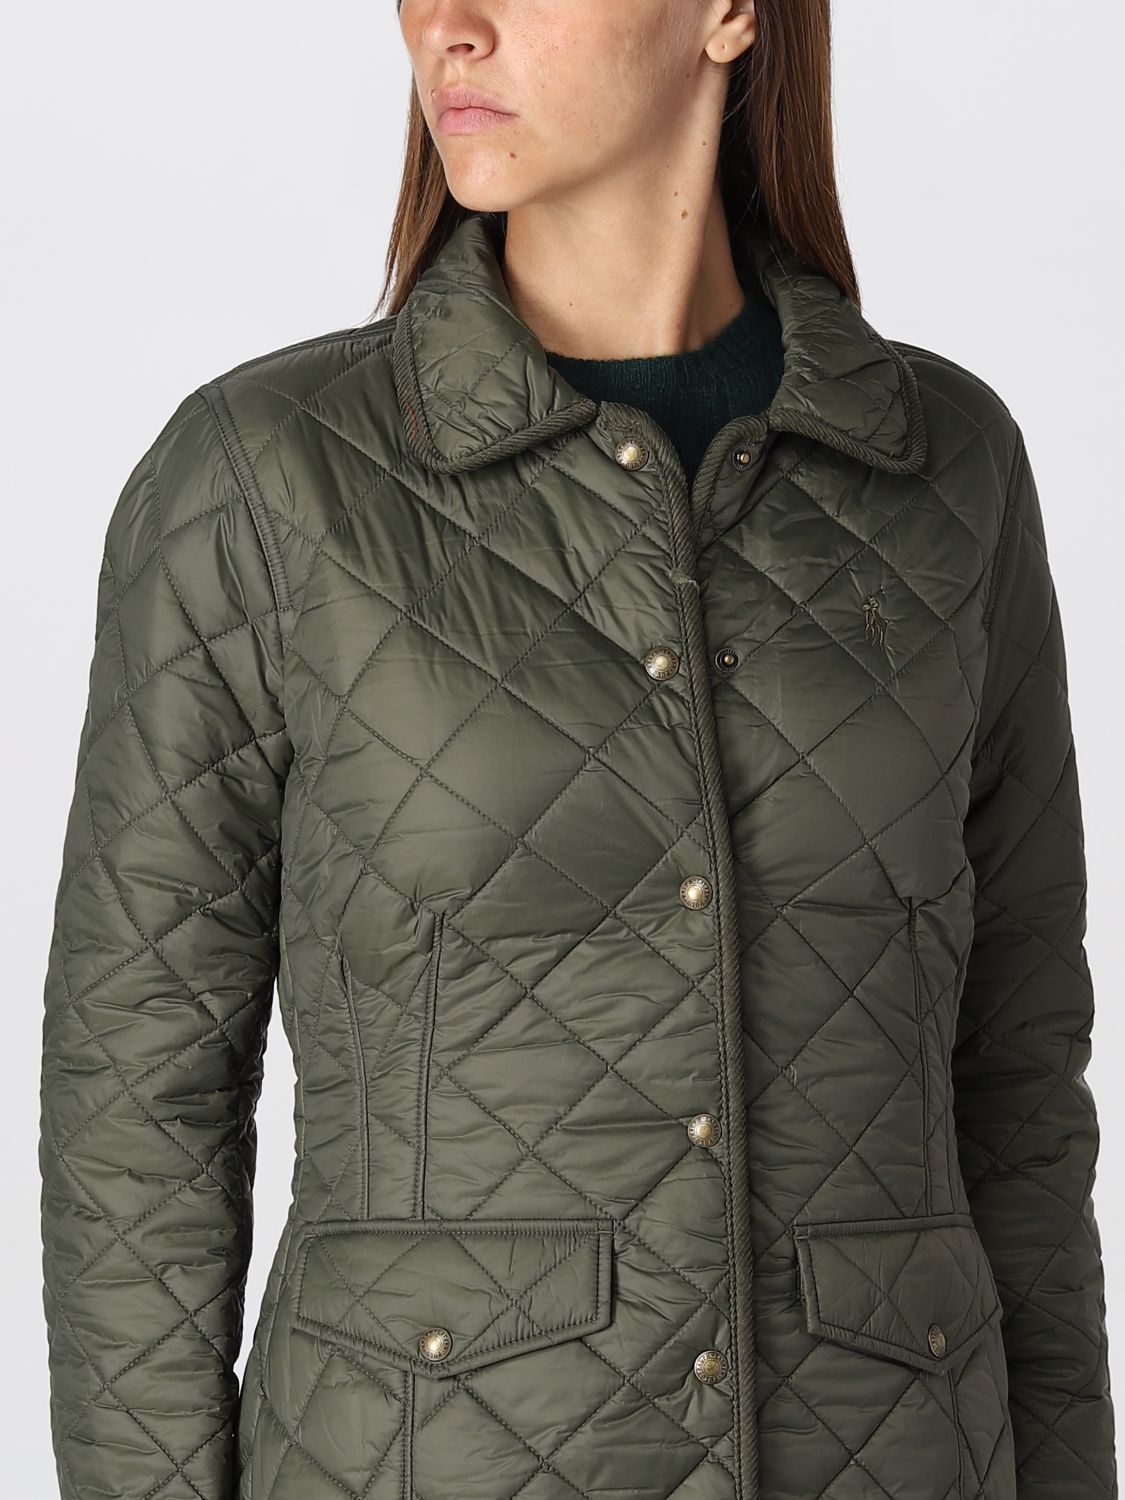 POLO RALPH LAUREN: jacket for woman - Olive | Polo Ralph Lauren jacket ...